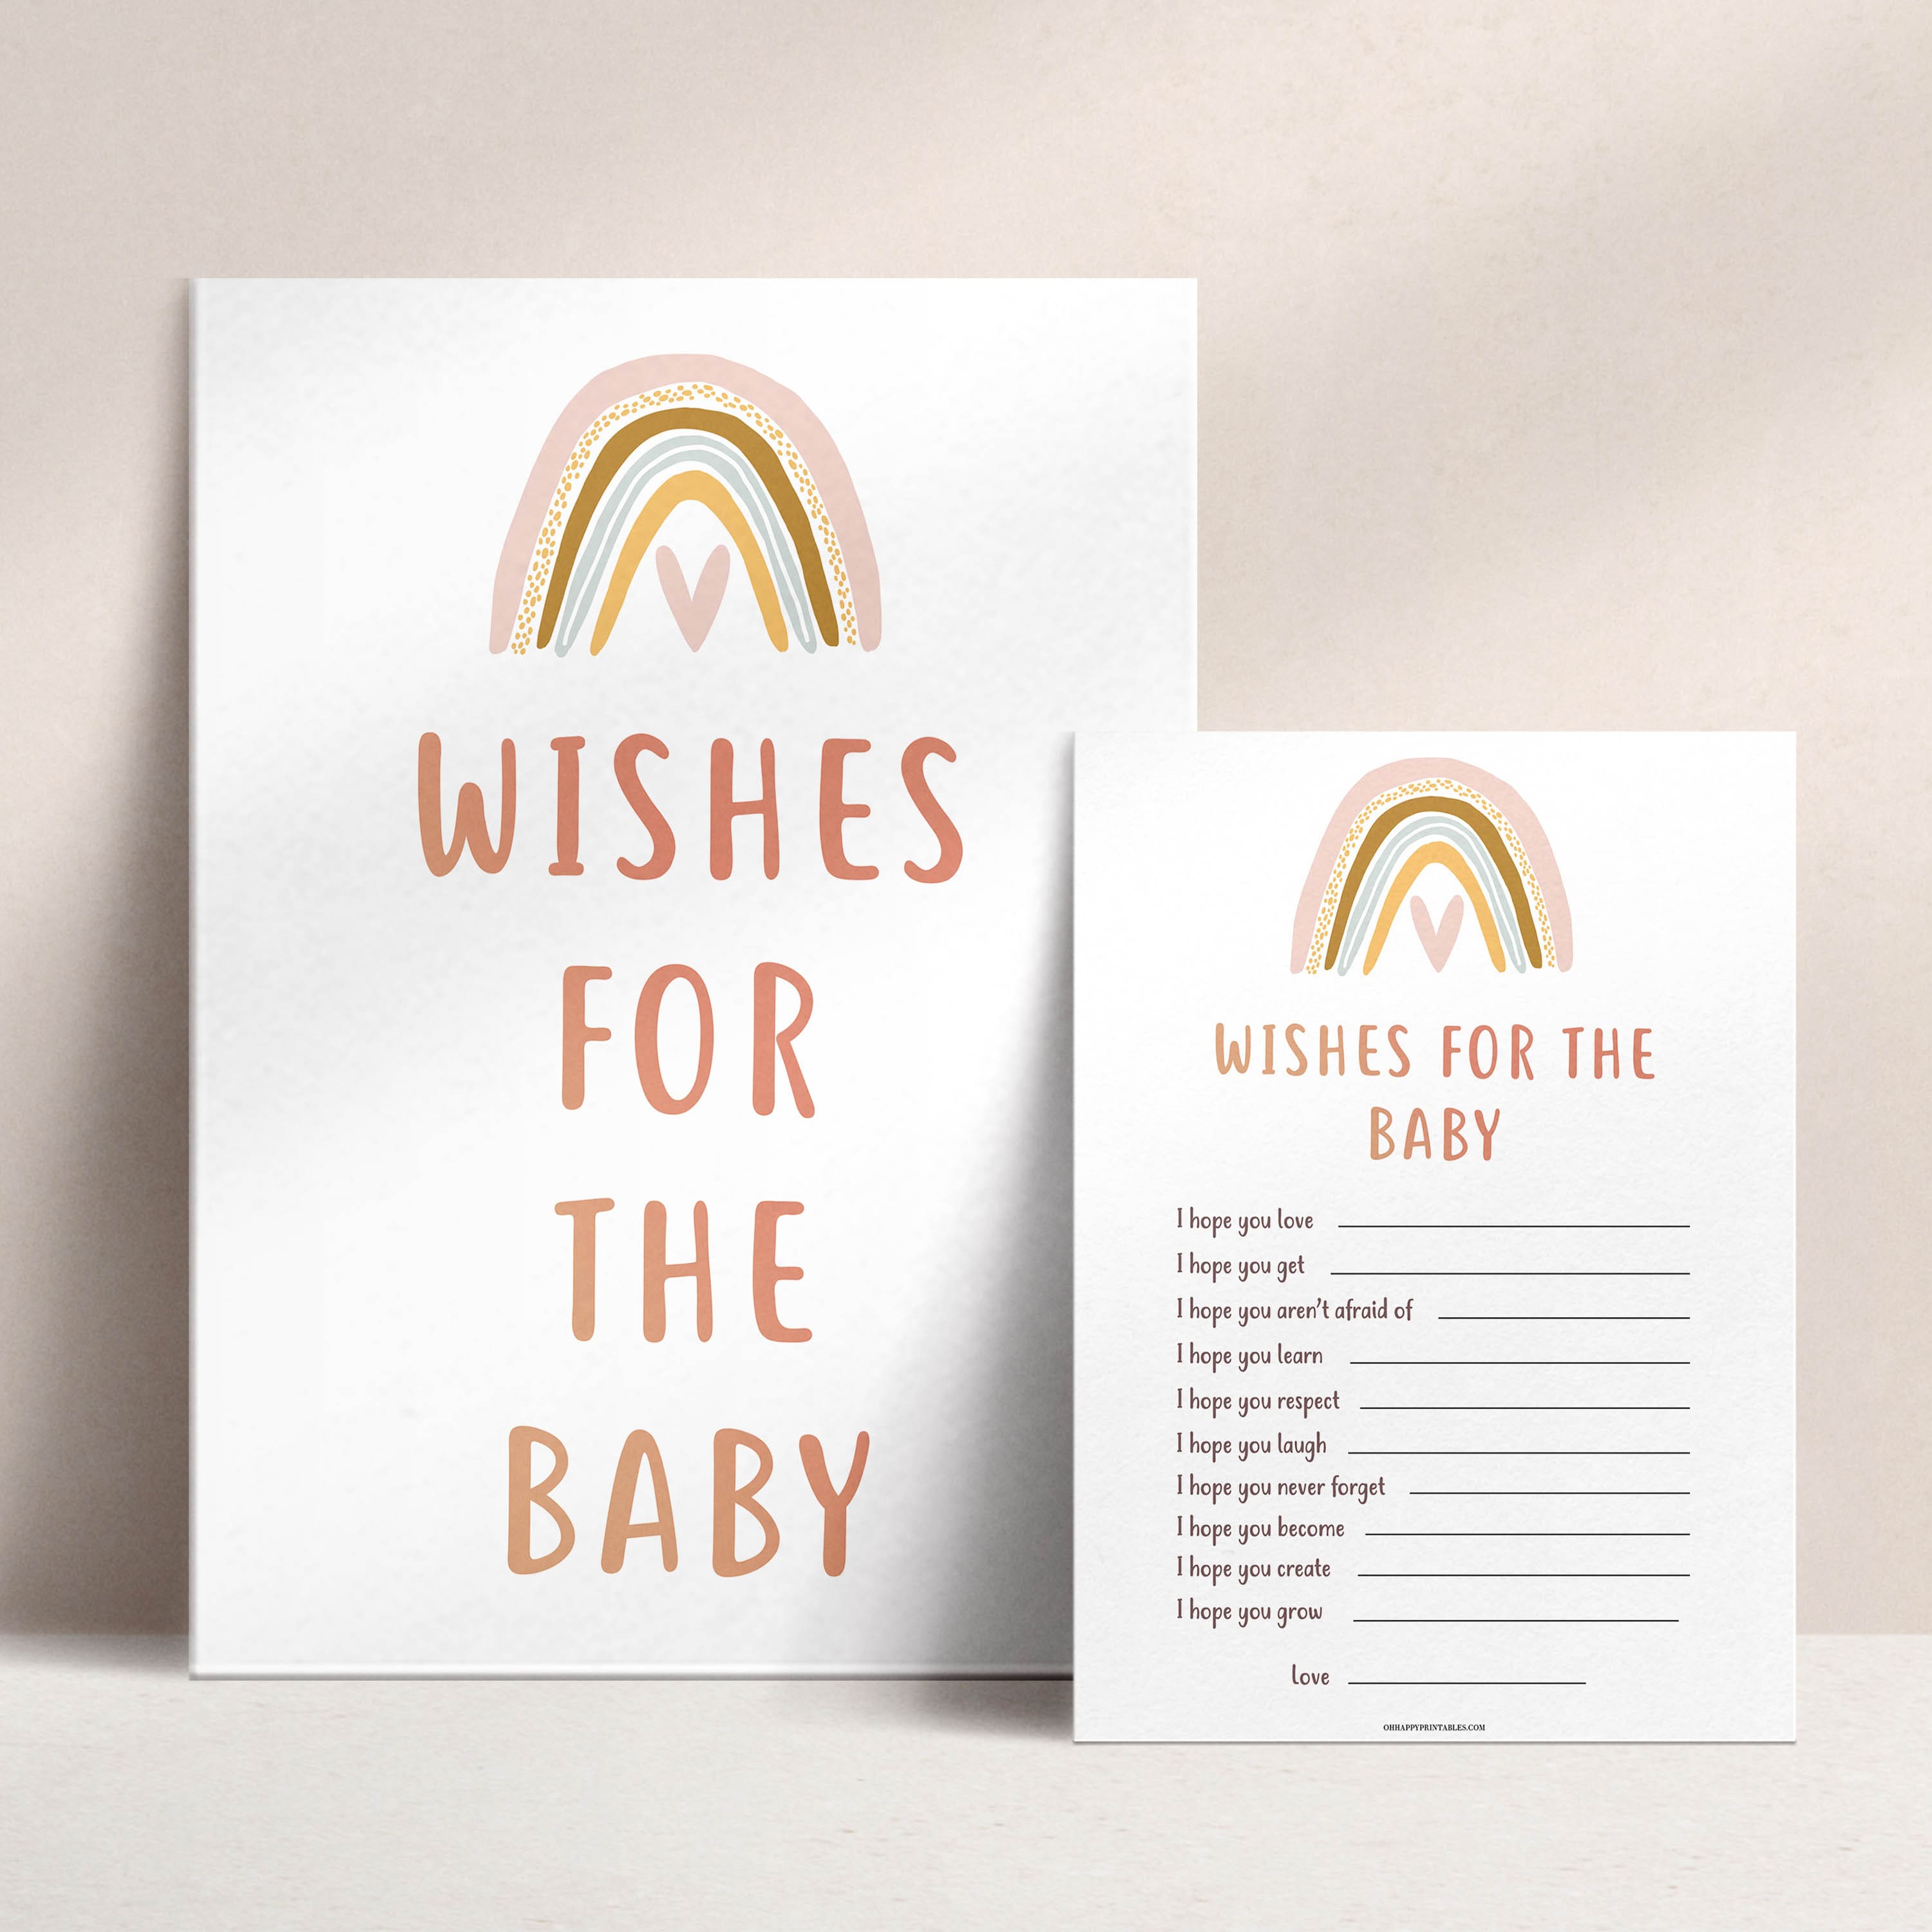 wishes for the baby keepsake, Printable baby shower games, boho rainbow baby games, baby shower games, fun baby shower ideas, top baby shower ideas, boho rainbow baby shower, baby shower games, fun boho rainbow baby shower ideas